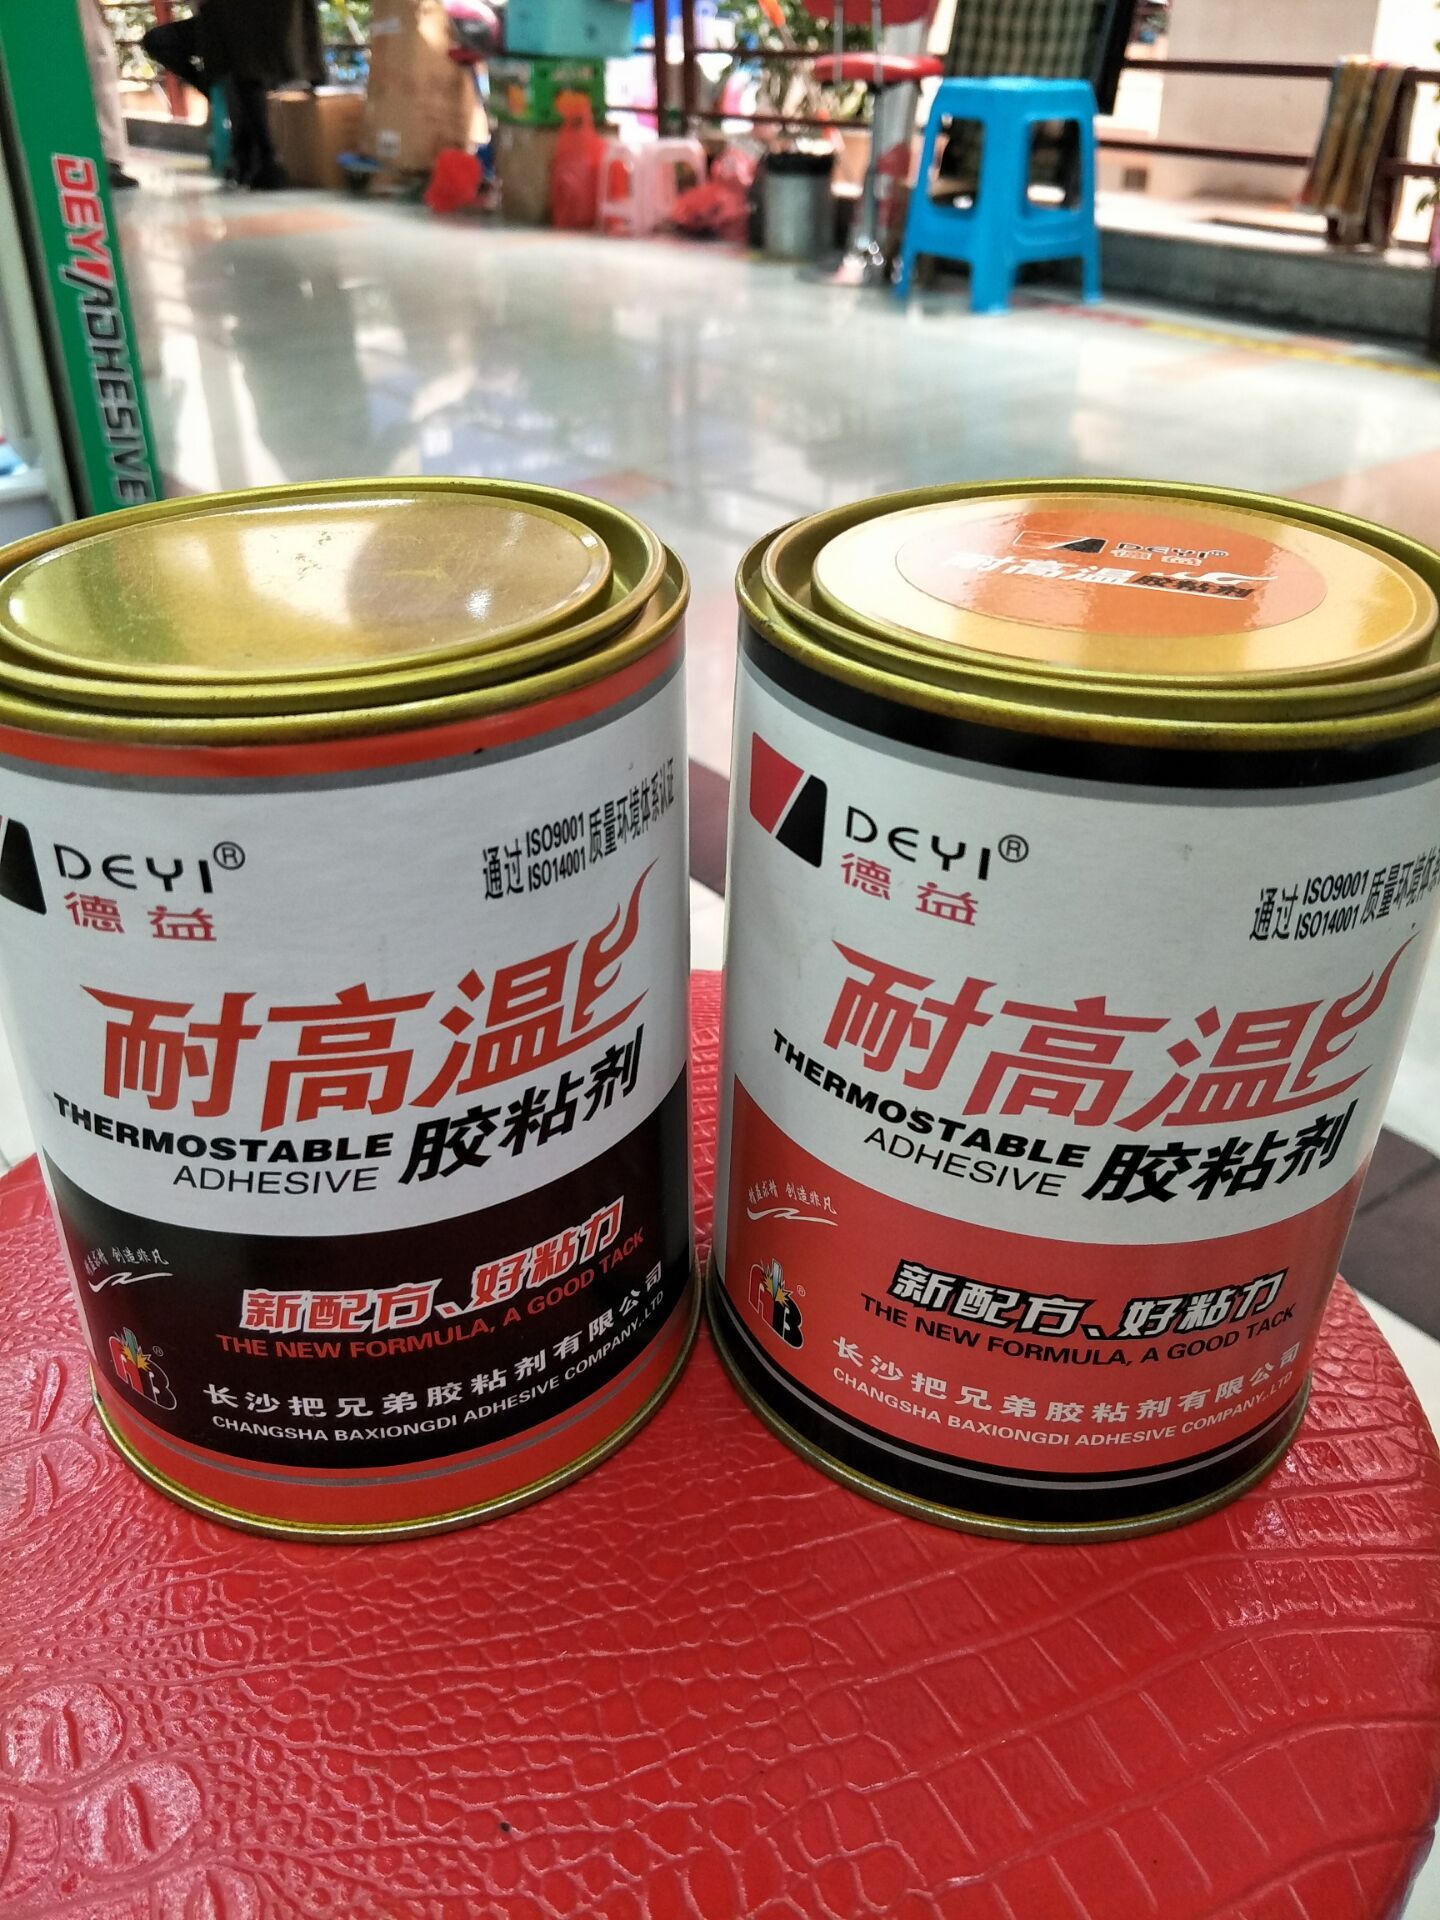 Paint coating rust mantra metal Paint tiger Paint Paint Paint Paint blending Paint